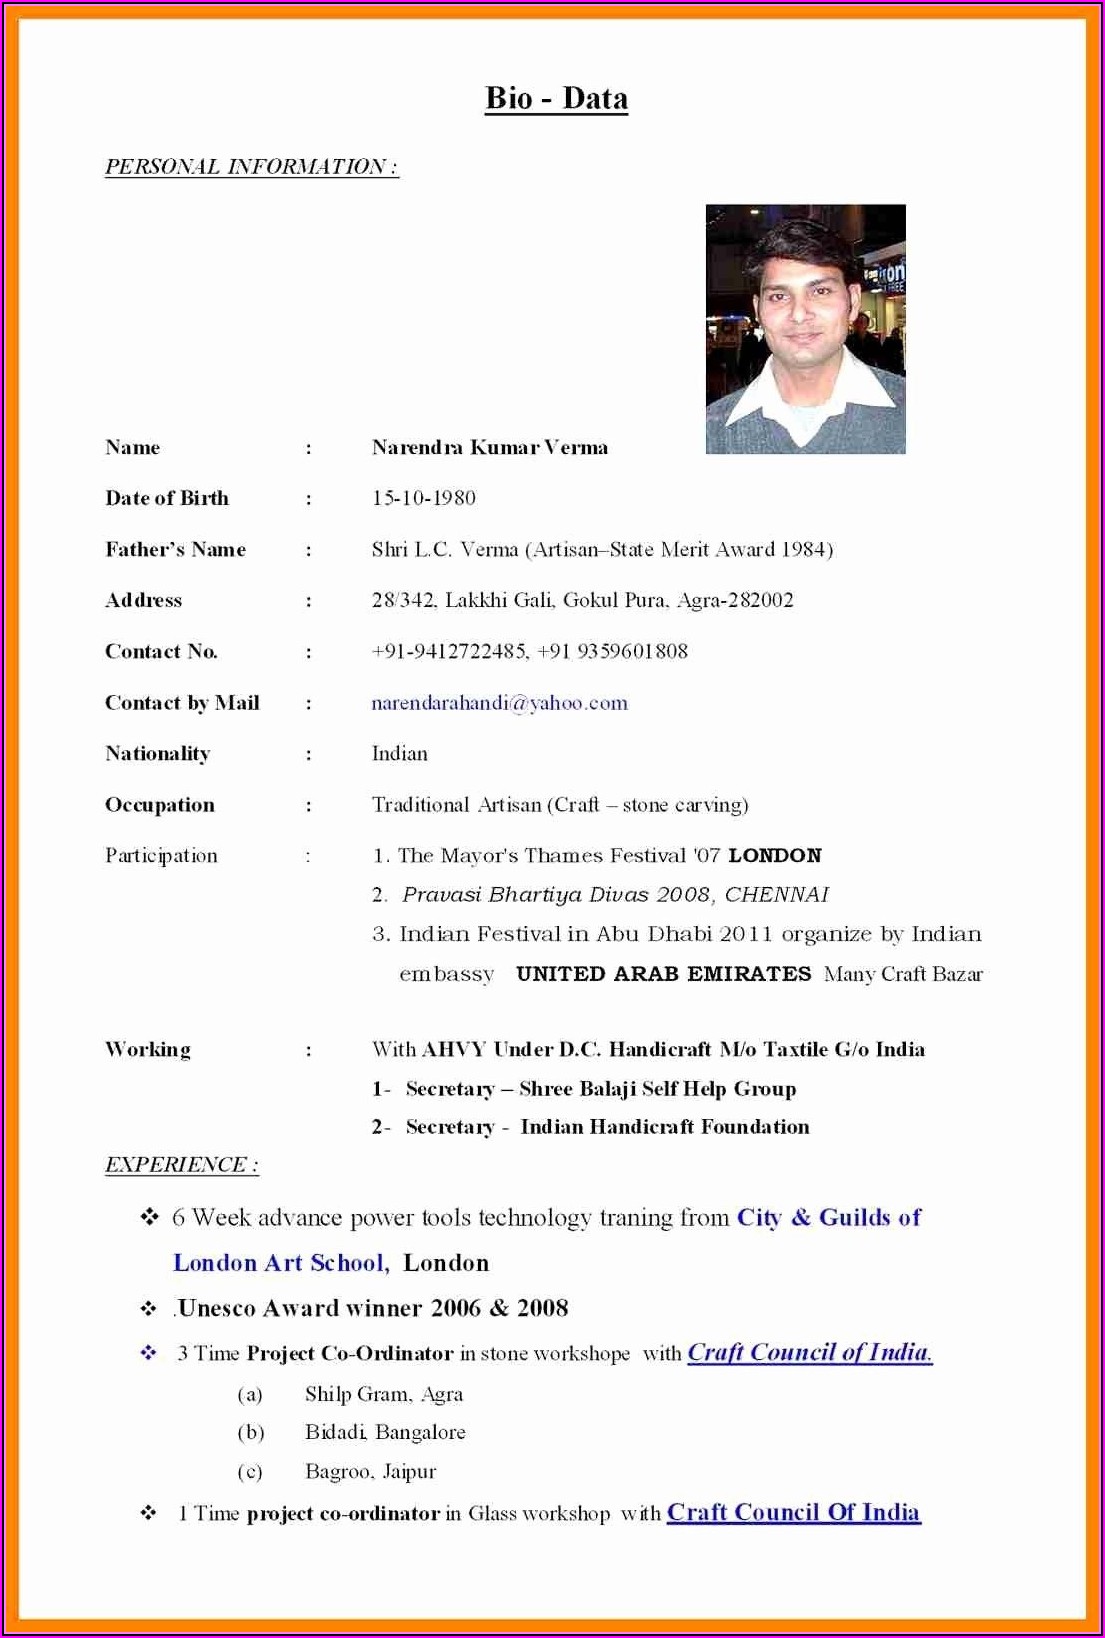 Marriage Resume Format For Boy Pdf